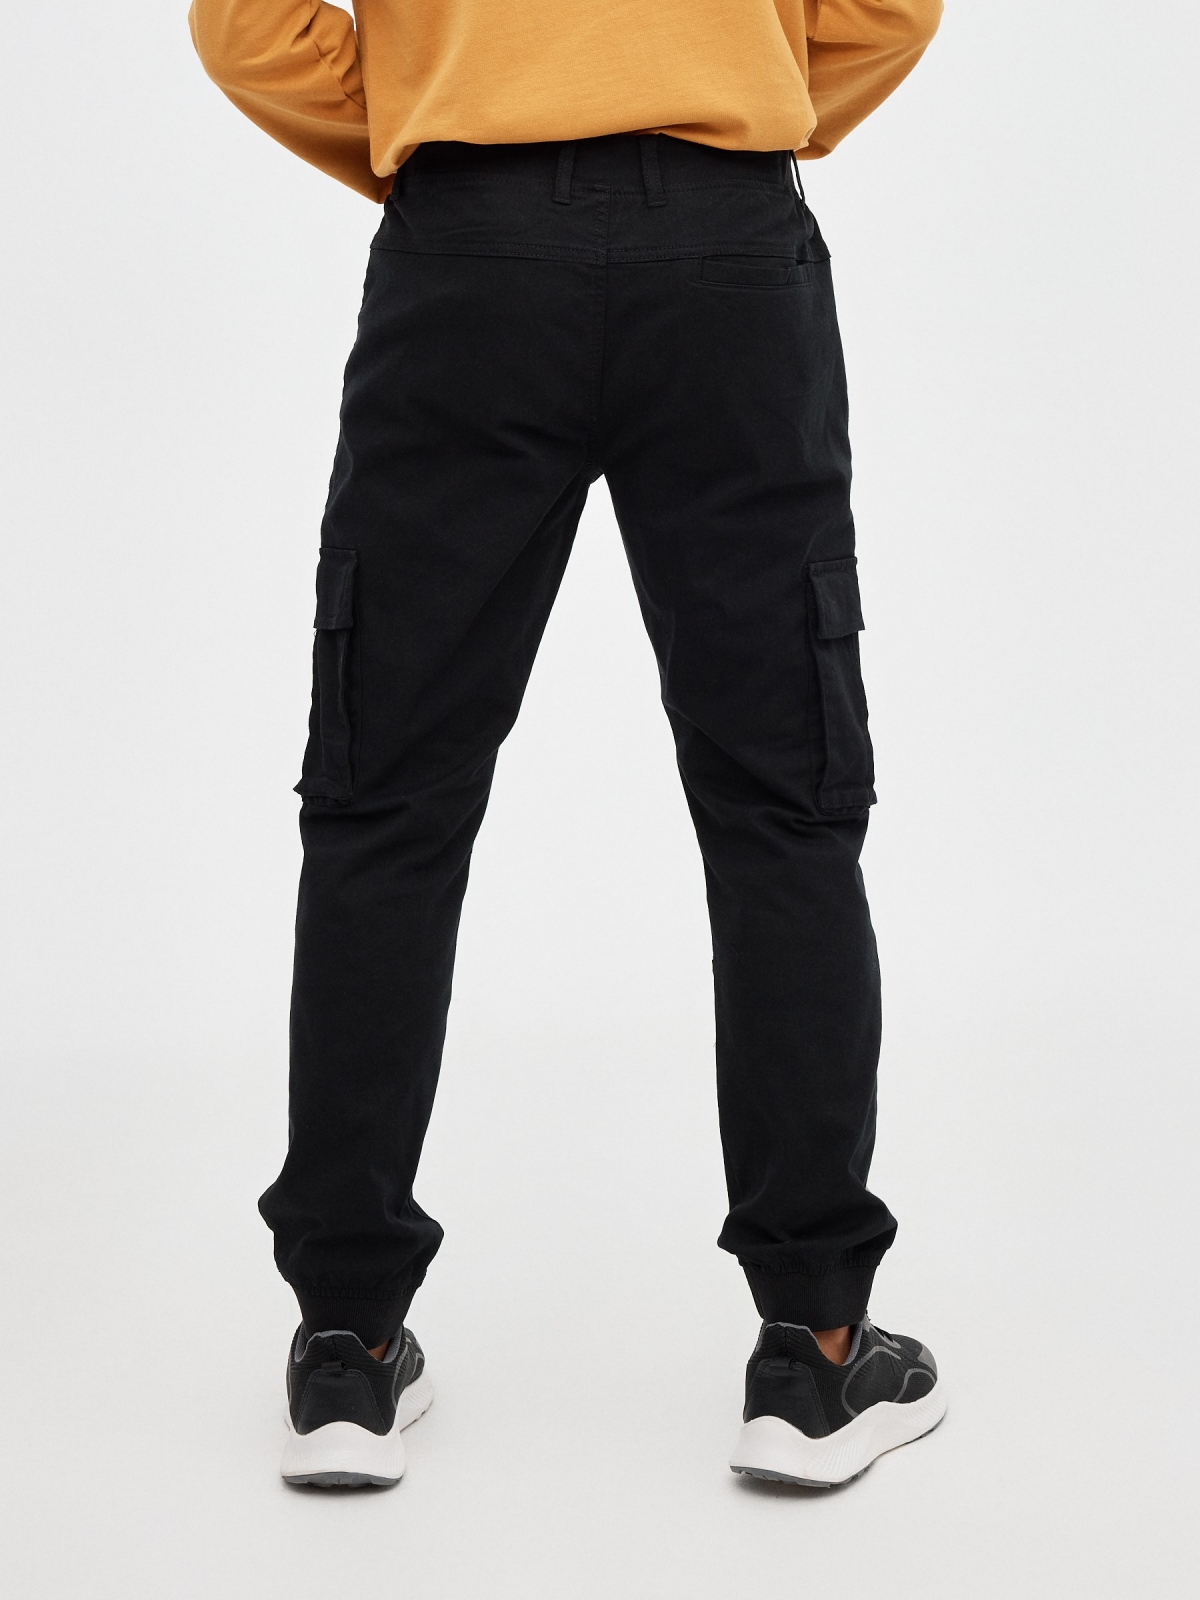 Jogger pants with pocket legs black middle back view